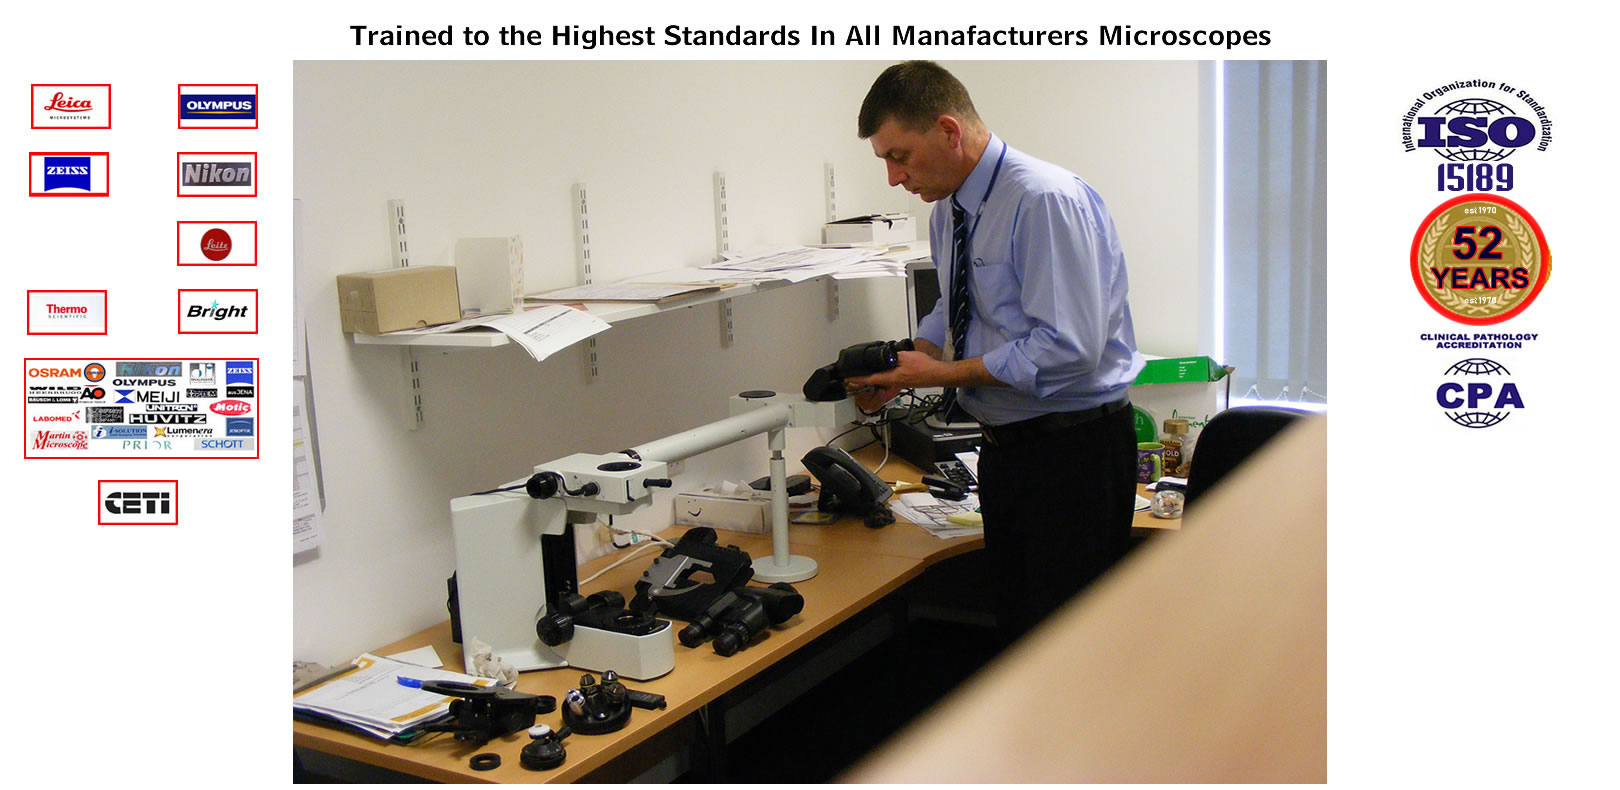 Recommended by 98.2% of Our Customers Call 01942 211832 or email web@ukmicroscopy.co.uk for a Free Quote